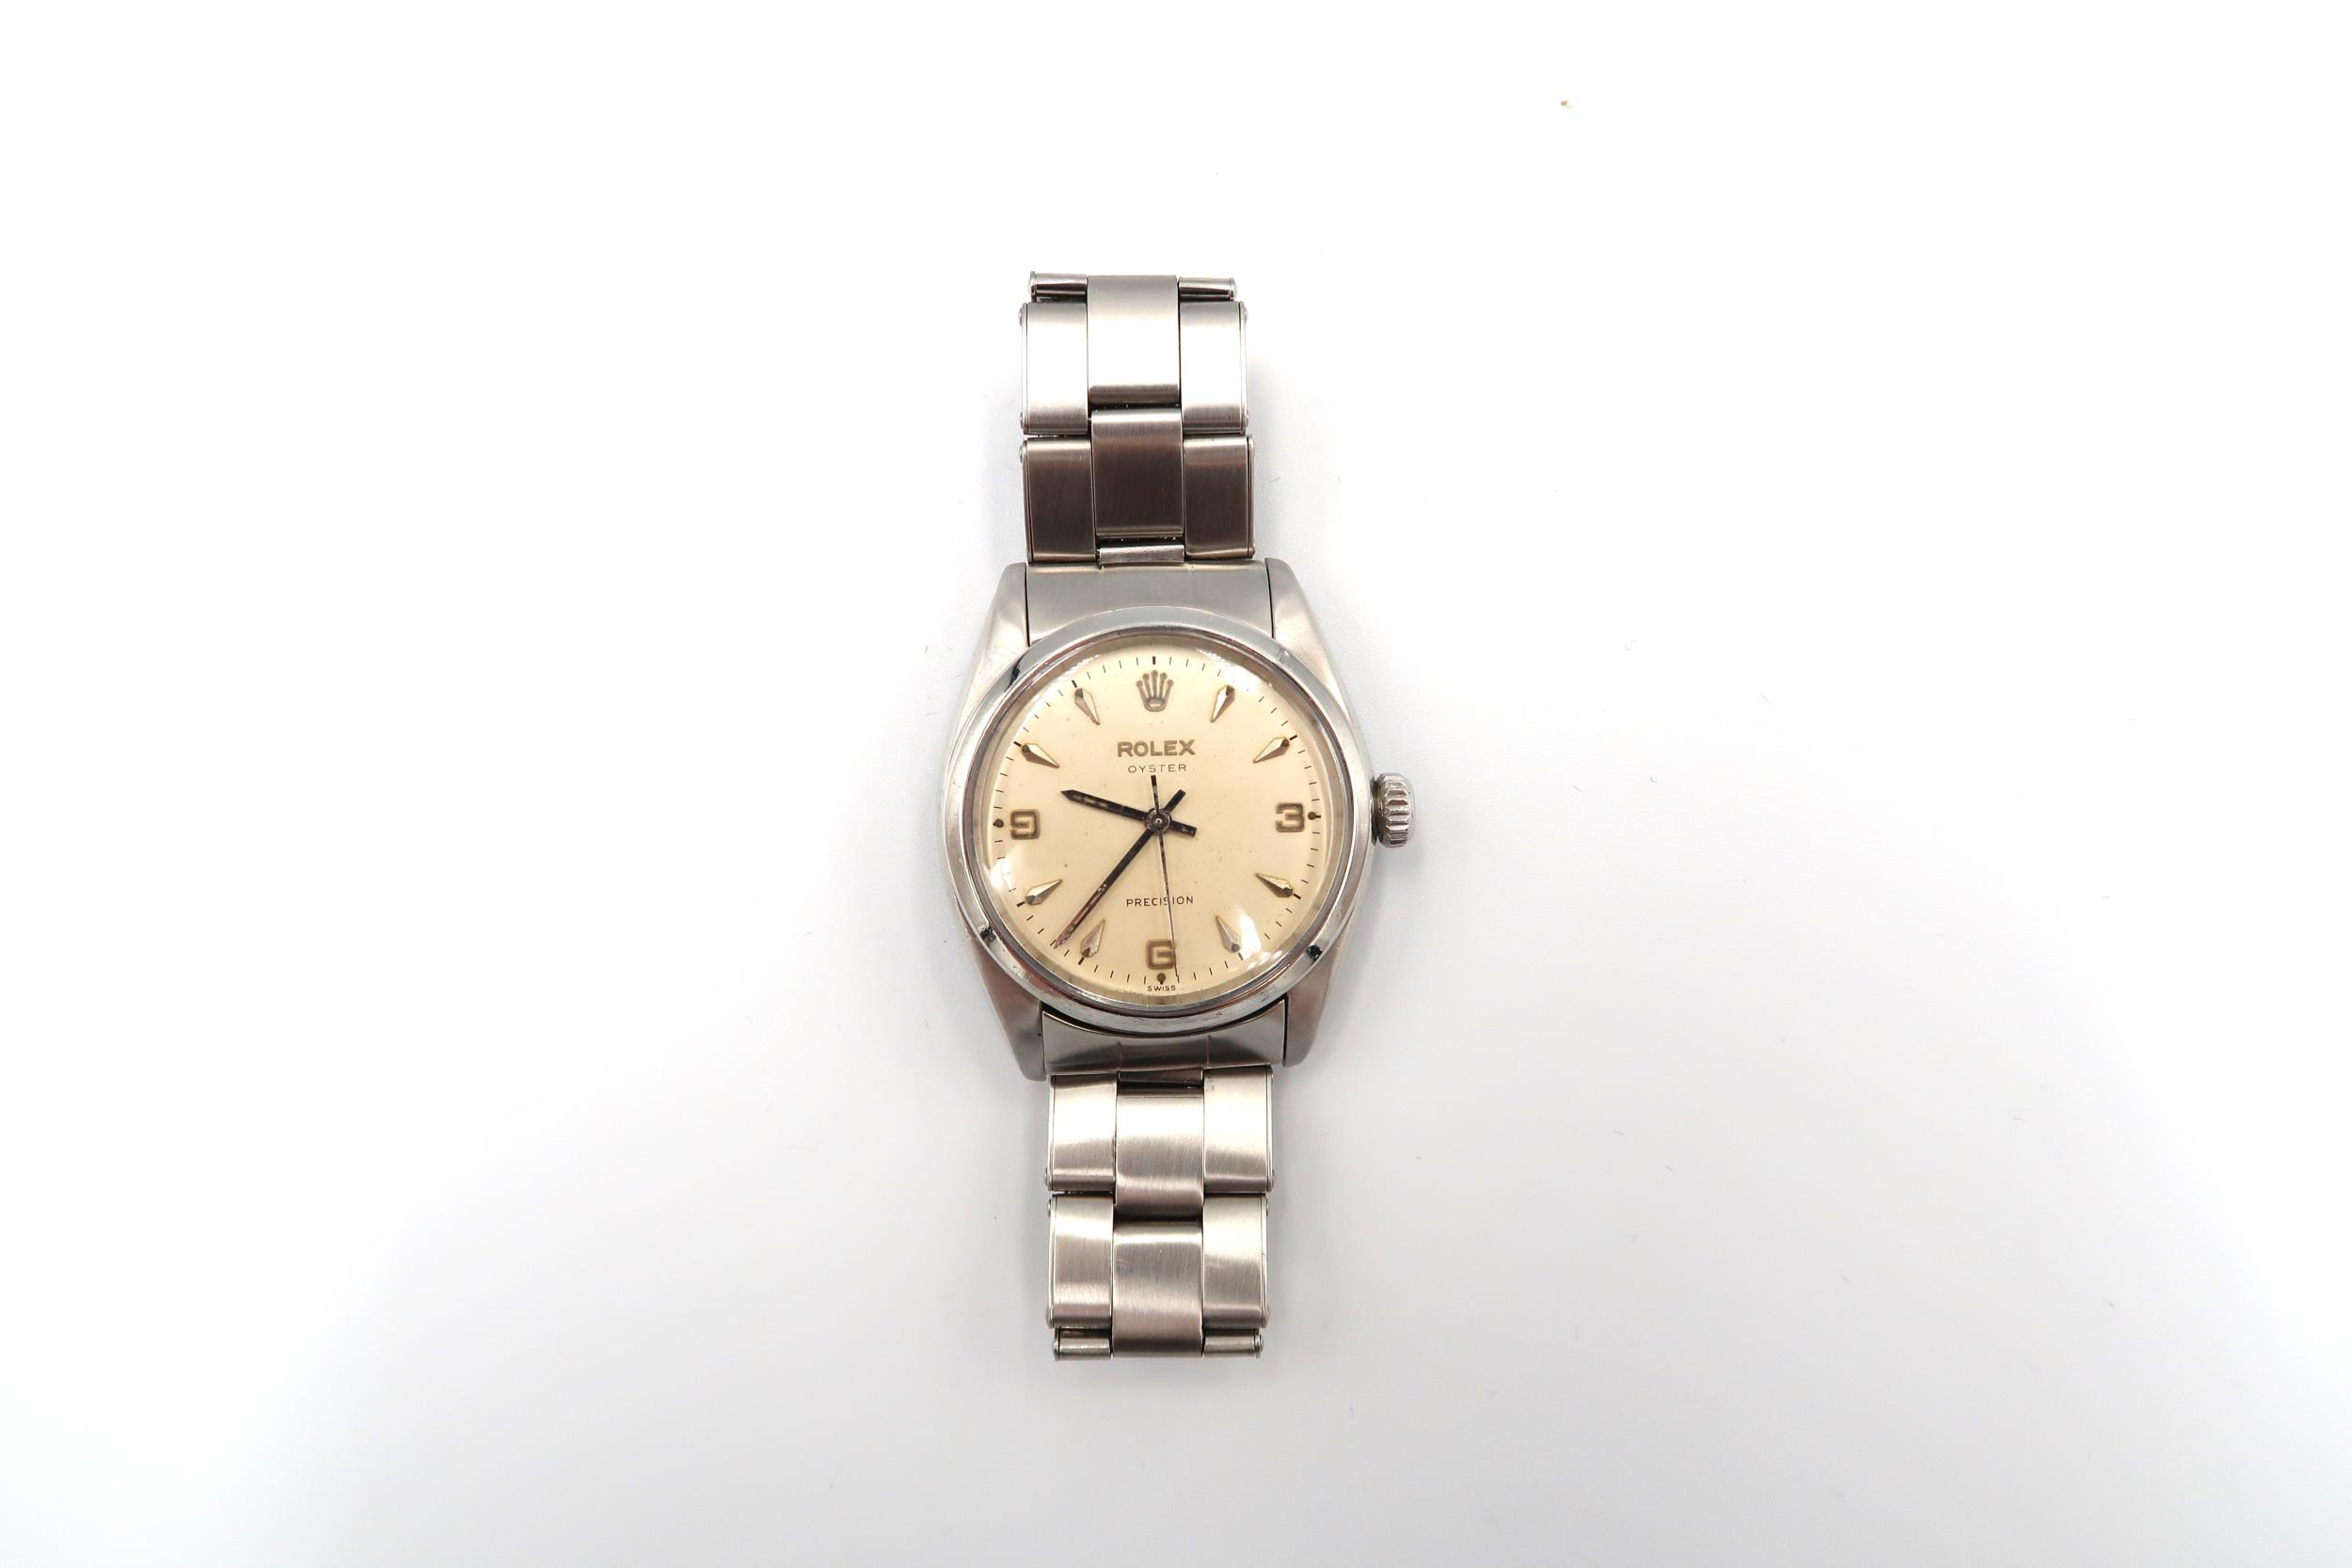 An early Gents steel cased Rolex Oyster precision wristwatch - diameter 35mm not including screw